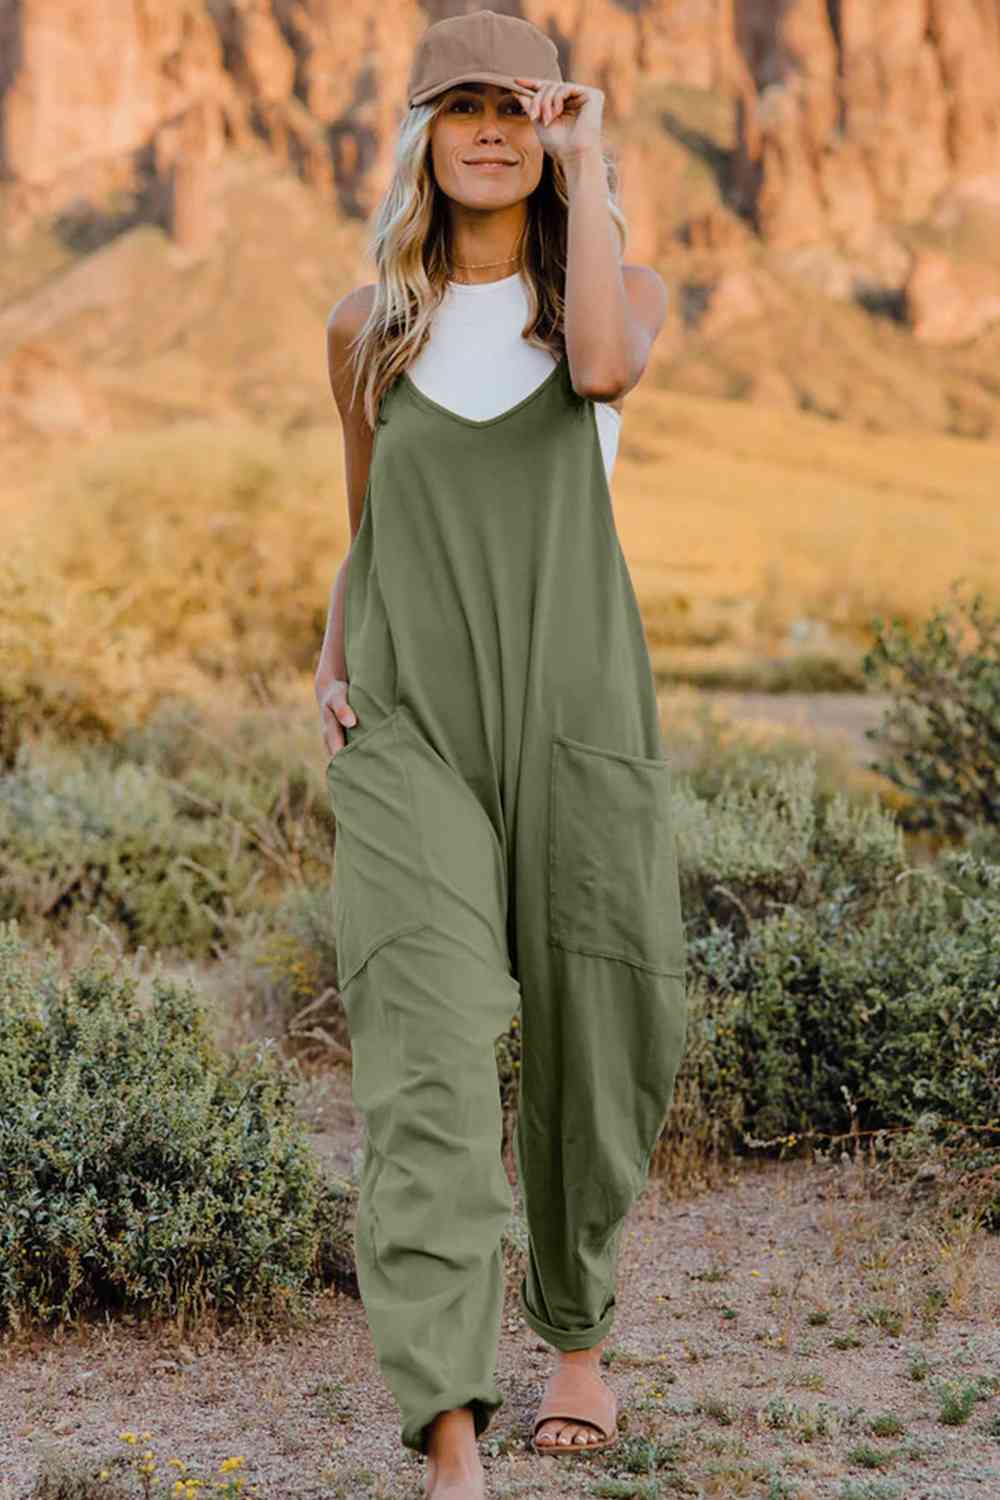 Double Take  V-Neck Sleeveless Jumpsuit with Pocket (6 Colors)